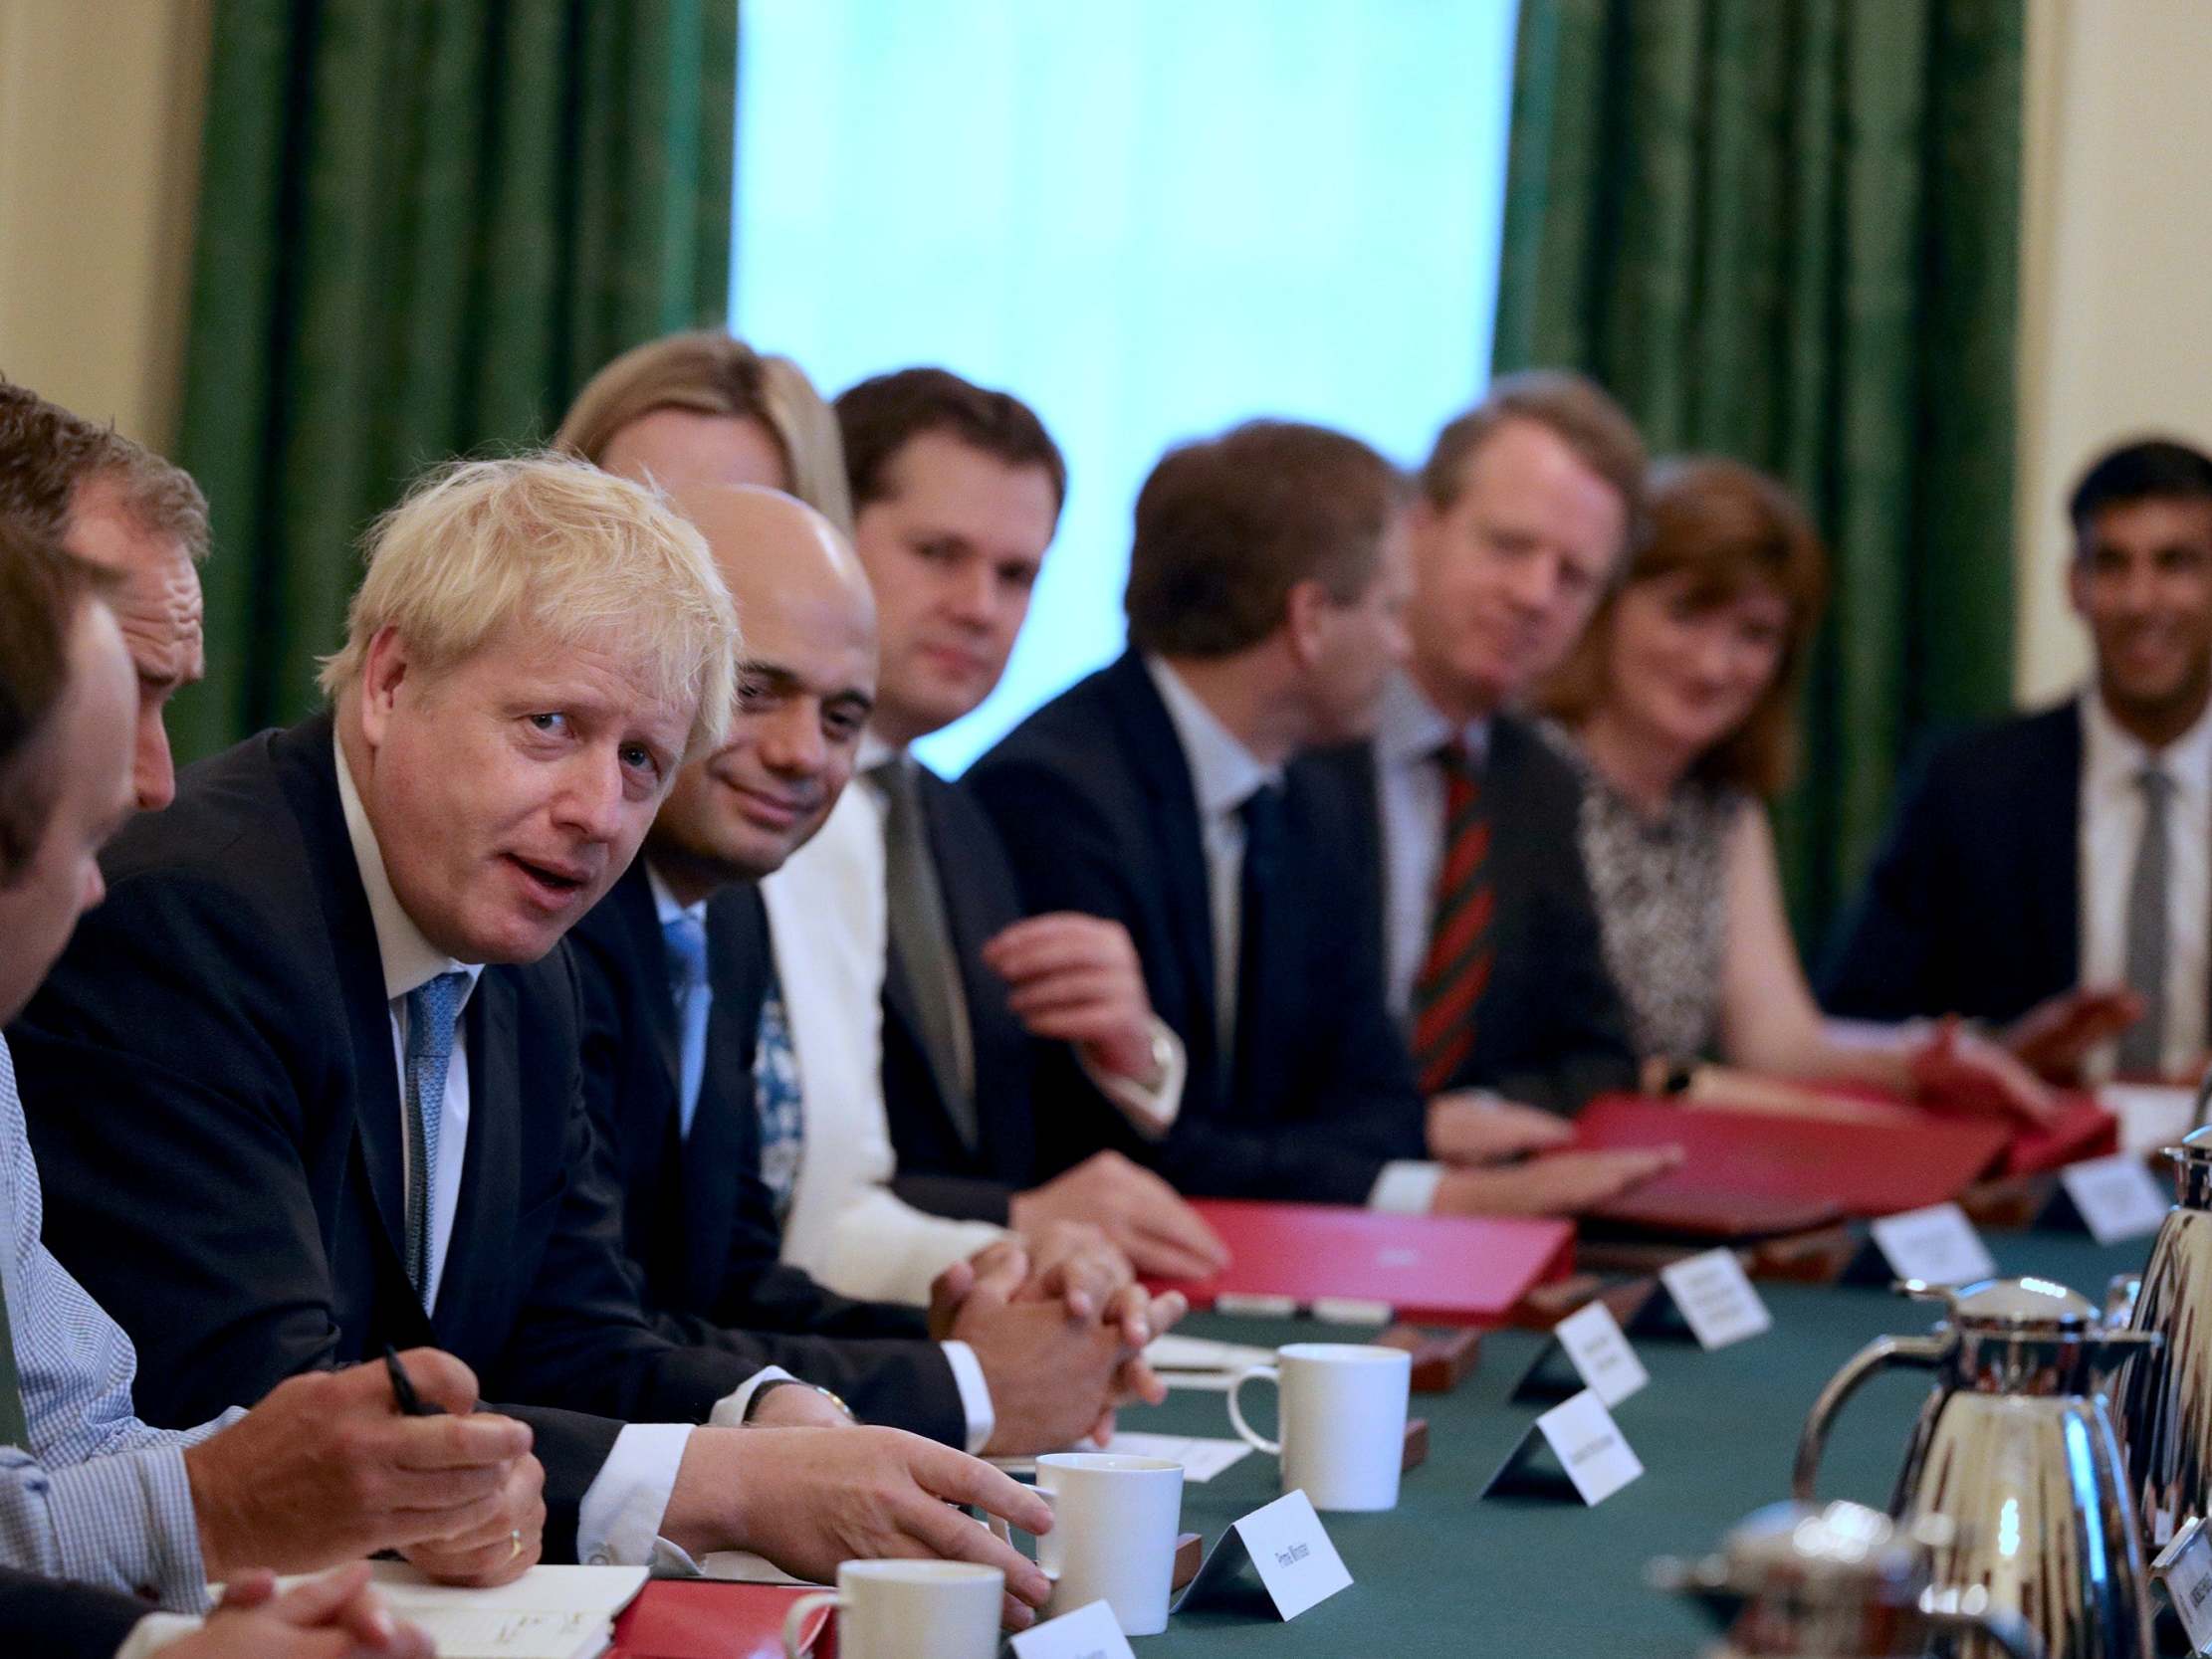 Only a quarter of Johnson’s cabinet are women, and nearly two-thirds are privately educated